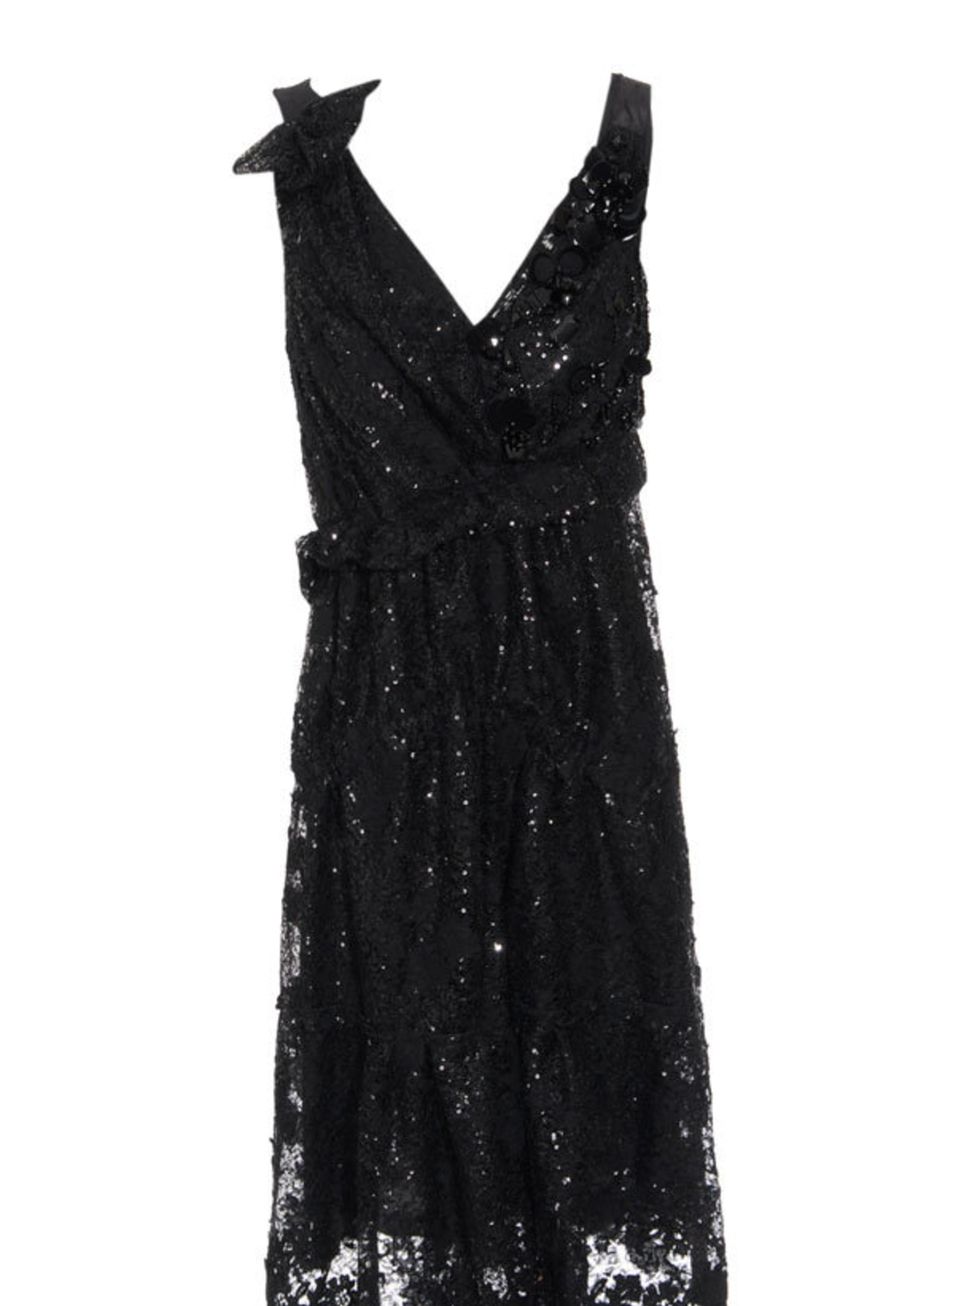 <p>Nina Ricci hand-embellished dress, £3,360, at <a href="http://www.brownsfashion.com/Product/Women/Women/Clothing/Dresses/Silk_mesh_dress_with_intricate_hand-embellishment/Product.aspx?p=3235410&amp;pc=1949762&amp;cl=4">Browns Fashion</a></p>